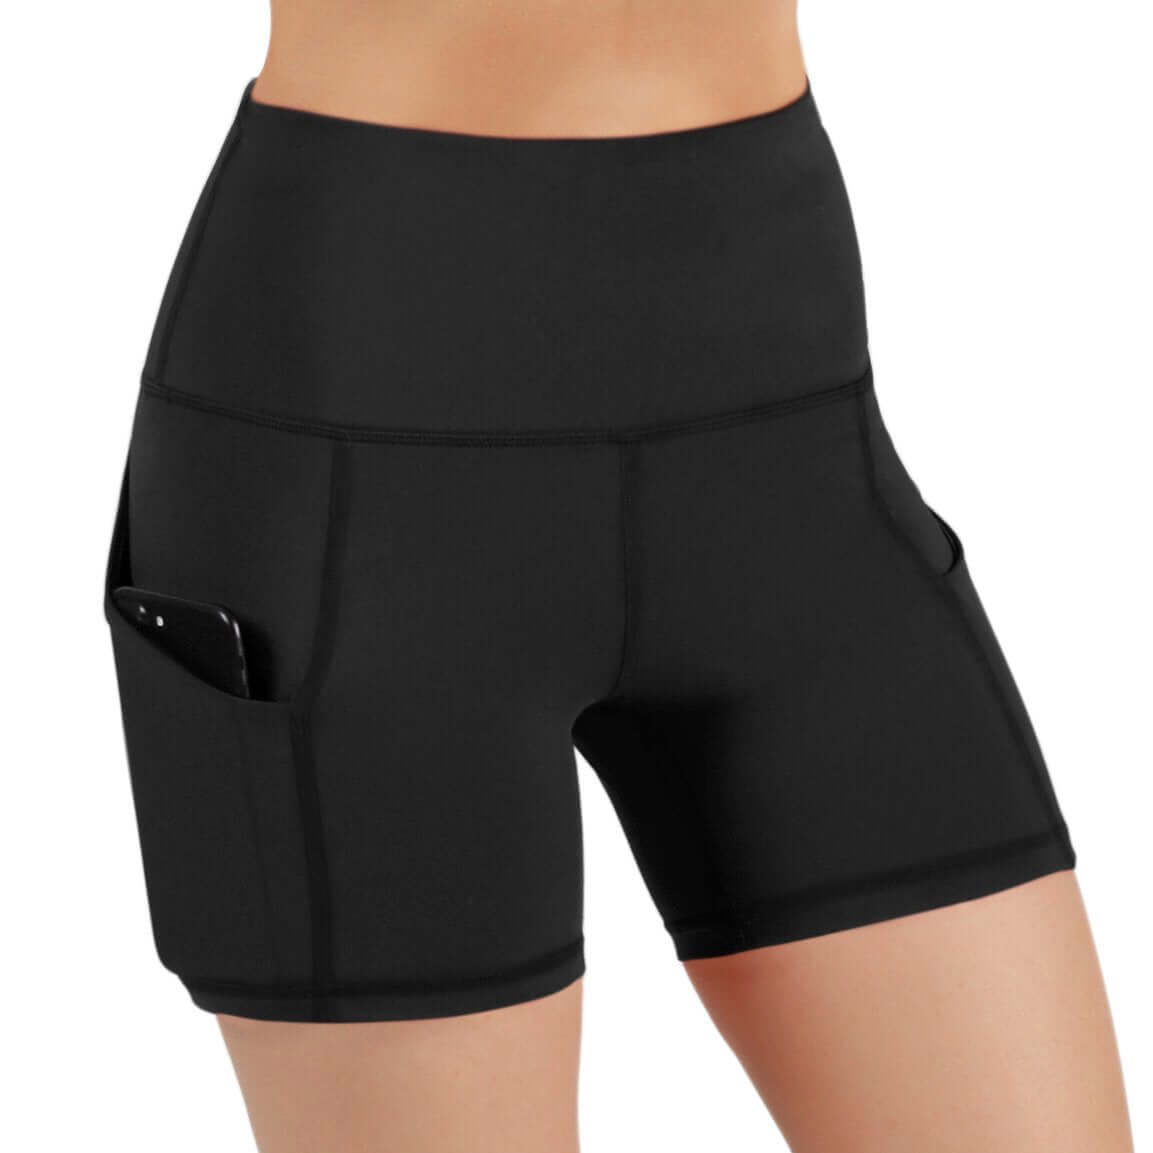 Buy Oalka Women's Running Shorts Workout Athletic Fitness Side Pockets Gym  Shorts Black XS at